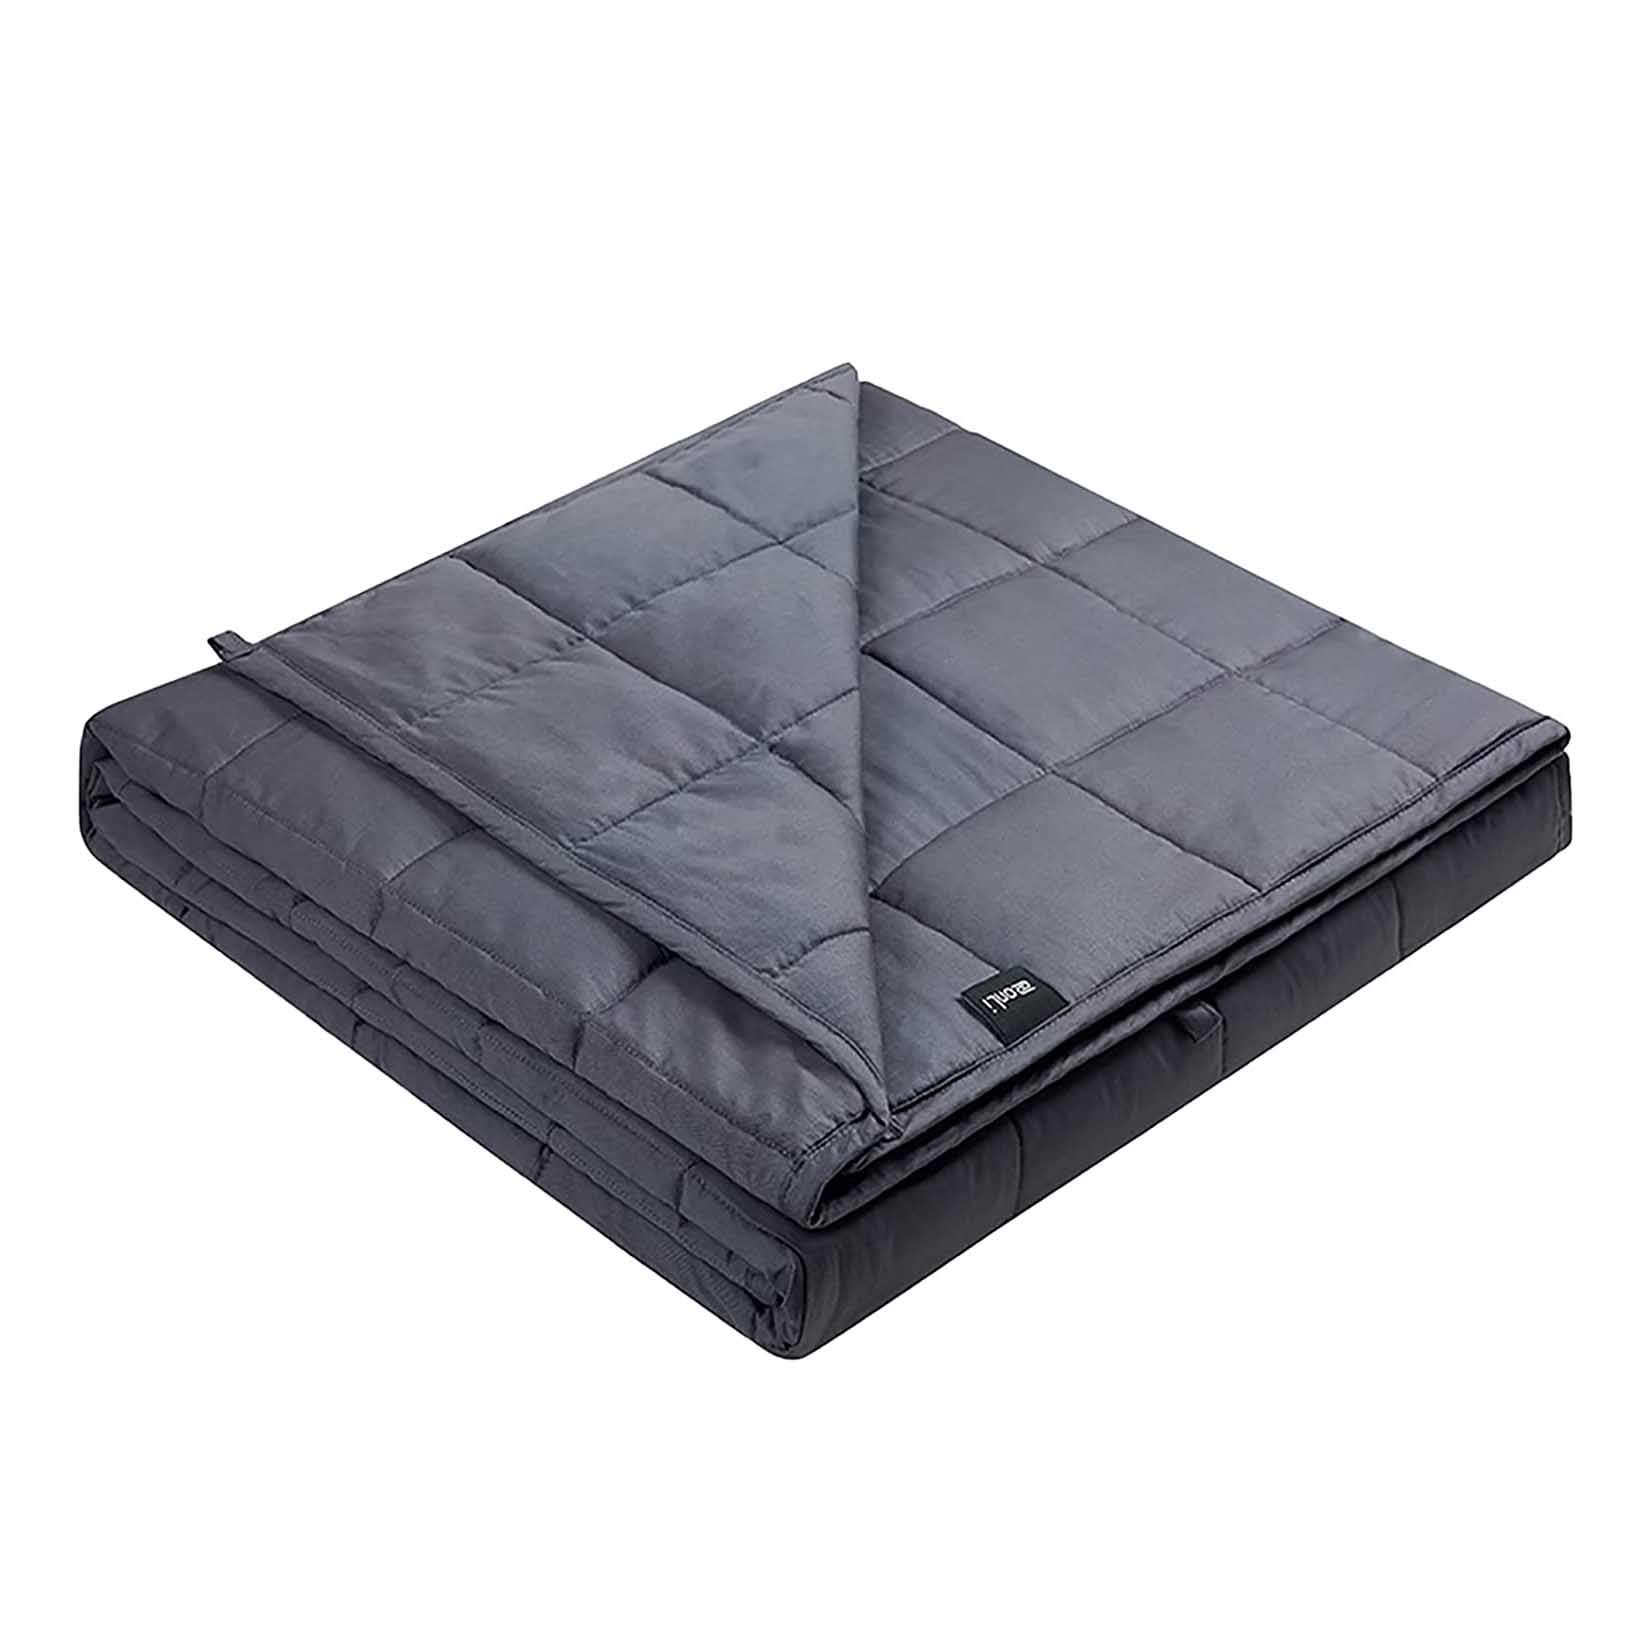 Best OEM Weighted Knitted Blanket Manufacturer- Weighted Blanket (60”x80”, 20lbs, Dark Grey), Cooling Weighted Blanket for Adults, High Breathability Heavy Blanket, Soft Material with ...